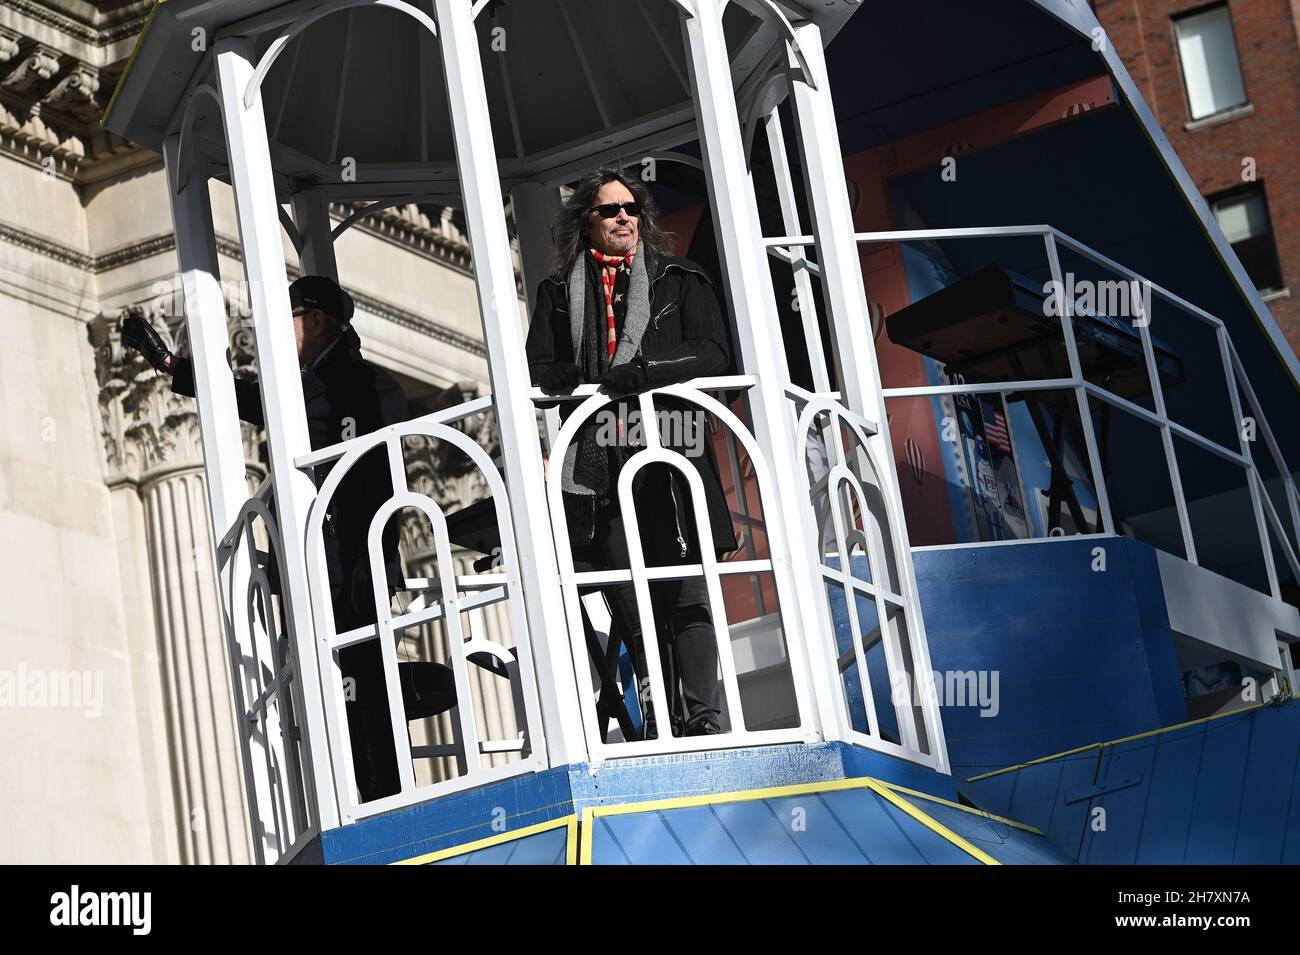 New York, USA. 25th Nov, 2021. Kelly Hansen, lead singer for the band Foreigner, rides a float in the 95th Annual Macy's Thanksgiving Day Parade, in New York, NY, November 25, 2021. The Parade returned to its full size this year after being downsized and closed to the public in 2020 due to the coronavirus pandemic. (Photo by Anthony Behar/Sipa USA) Credit: Sipa USA/Alamy Live News Stock Photo